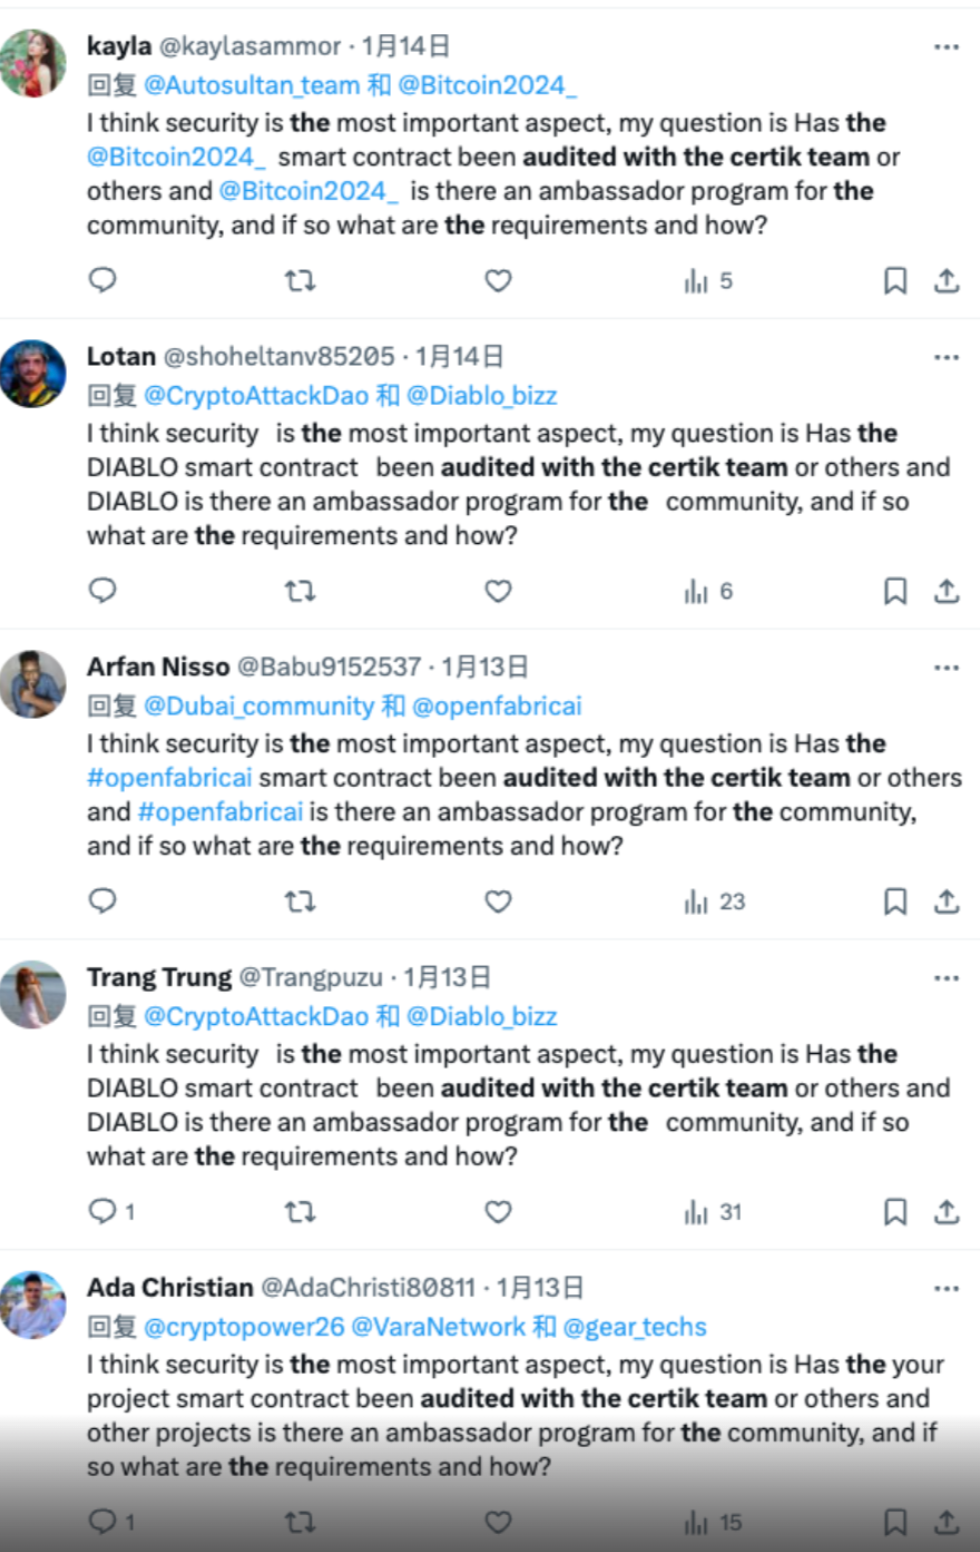 Pattern of Repetitive Social Media Posts Questioning Smart Contract Audits